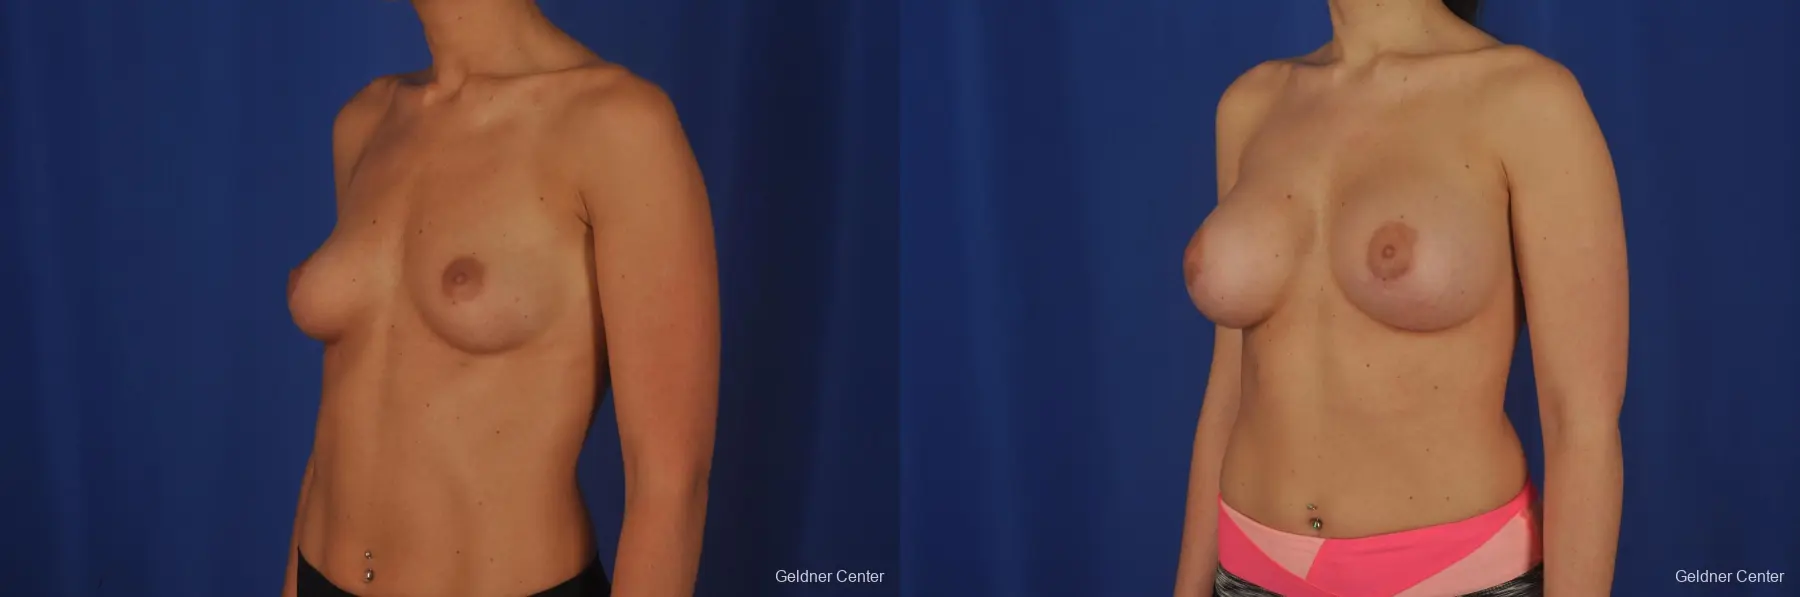 Breast Augmentation Lake Shore Dr, Chicago 2380 - Before and After 4